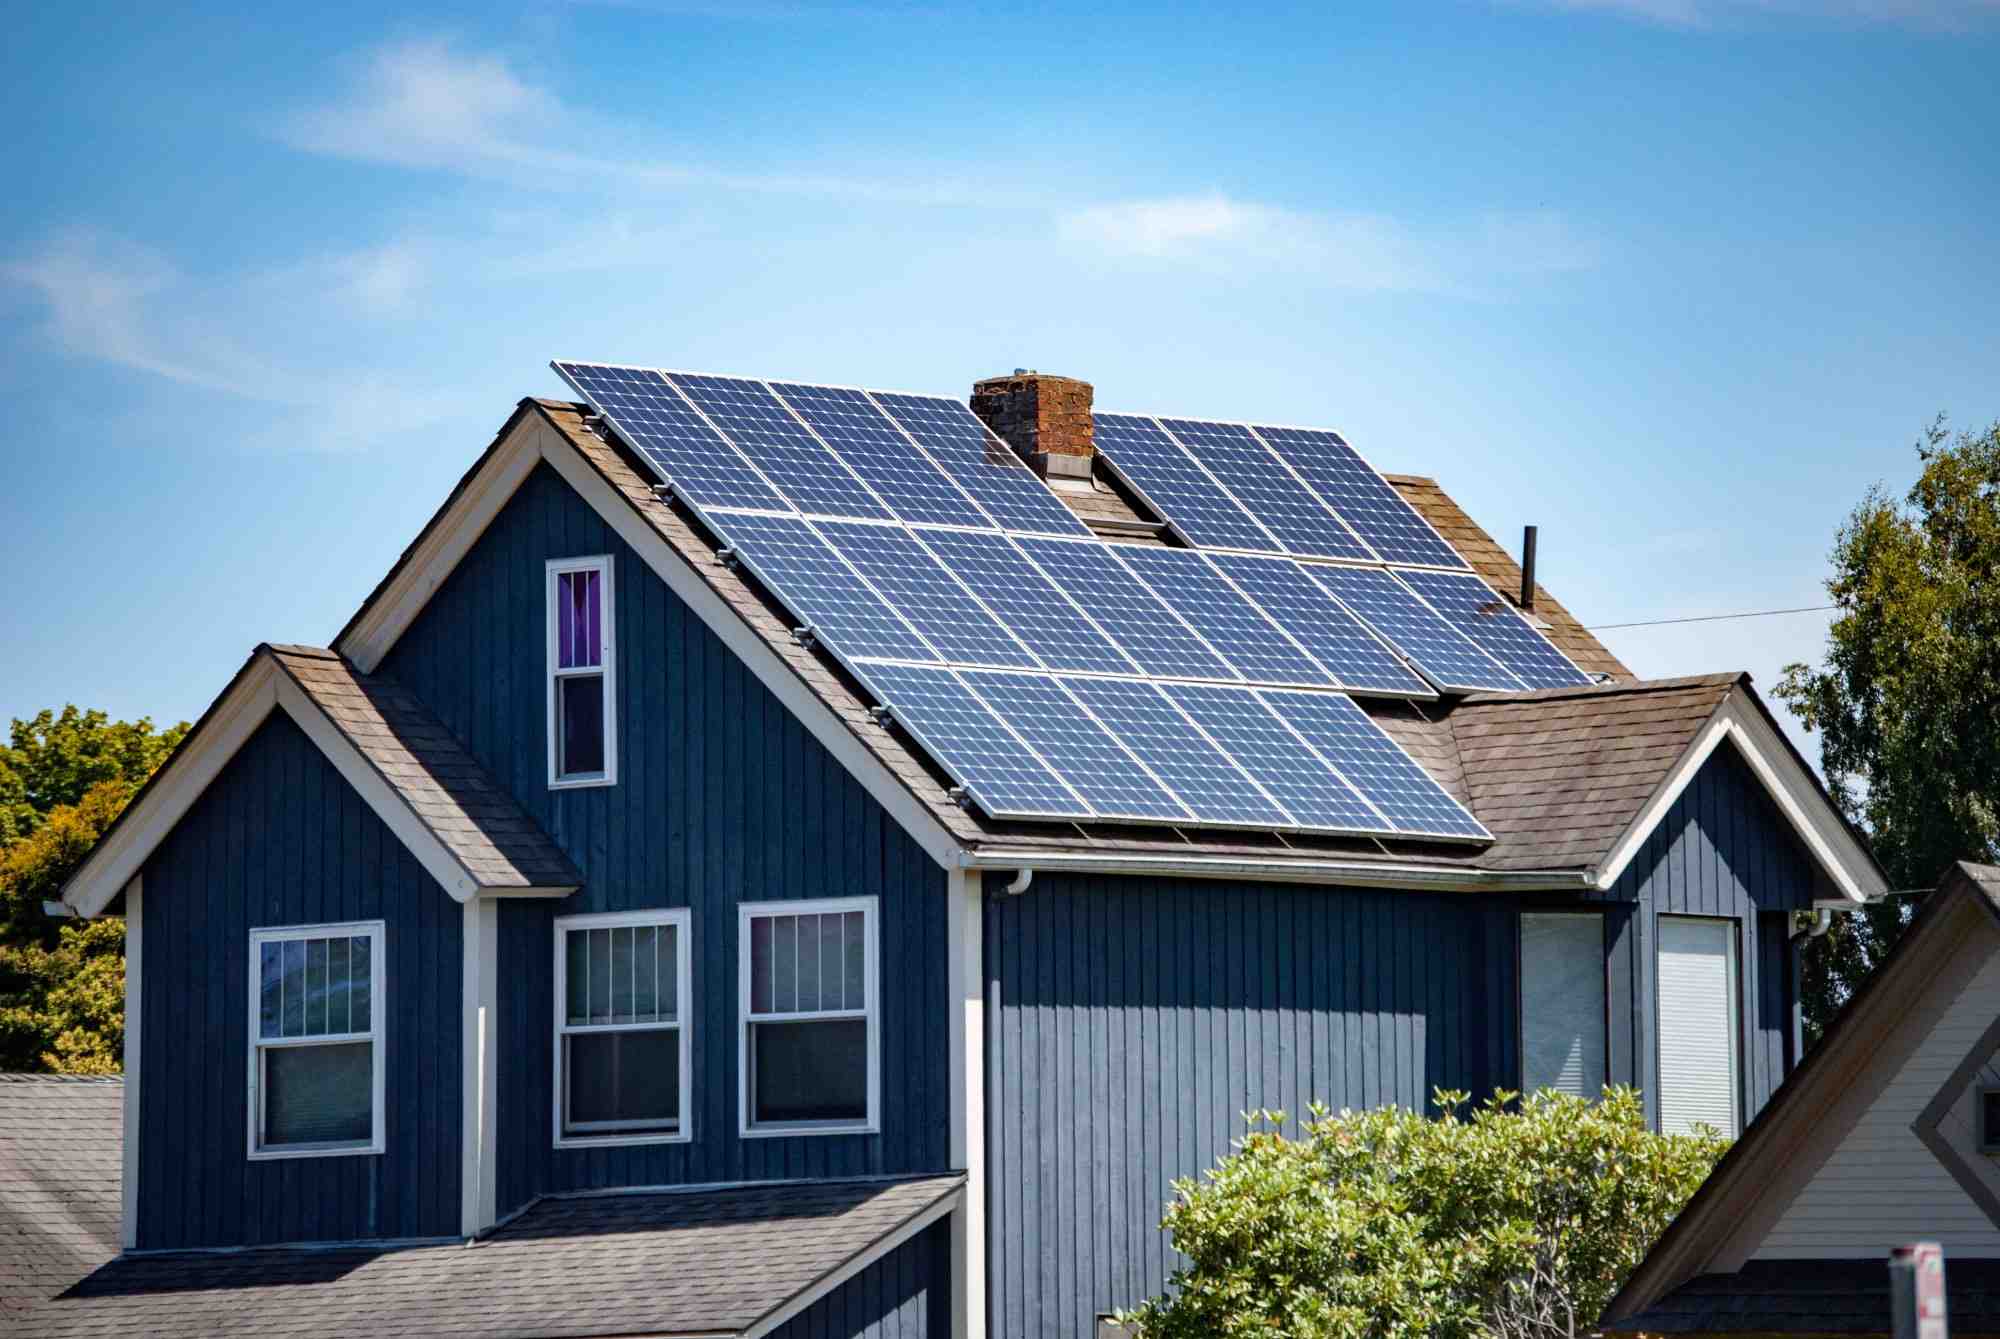 Can I completely power my home with solar?